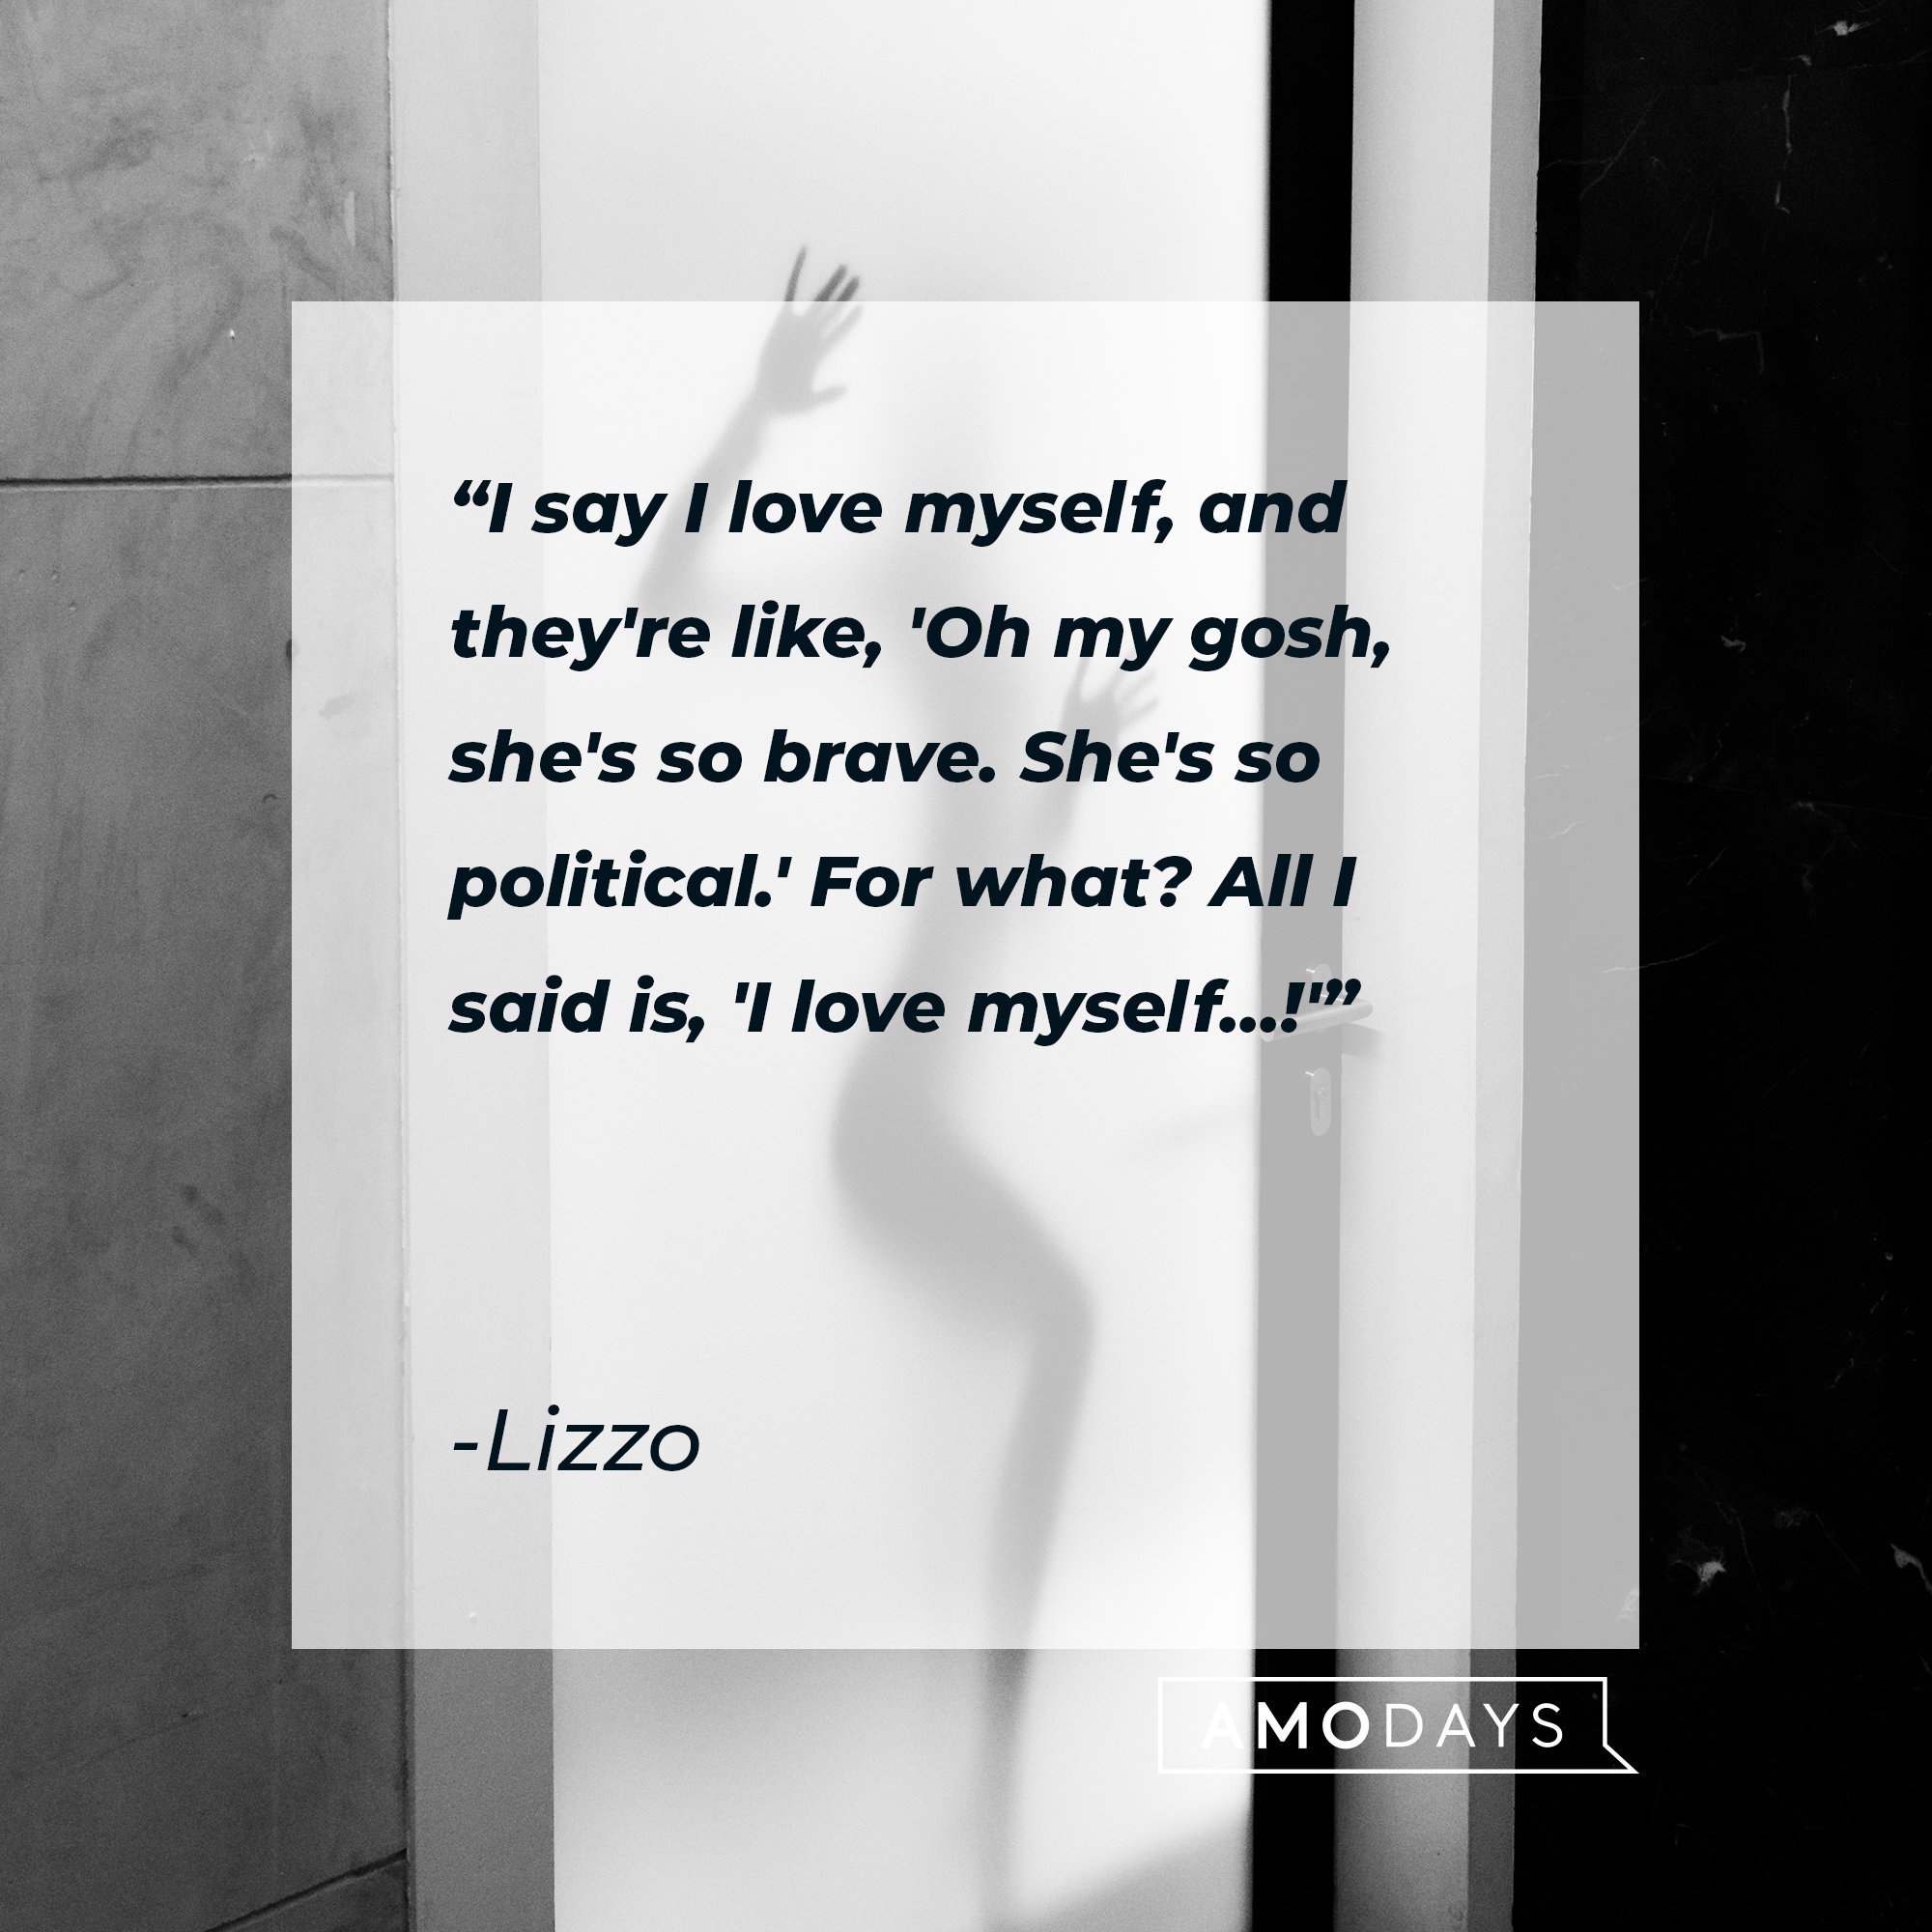 Lizzo’s quote: "I say I love myself, and they're like, 'Oh my gosh, she's so brave. She's so political.' For what? All I said is, 'I love myself…!'" | Image: AmoDays